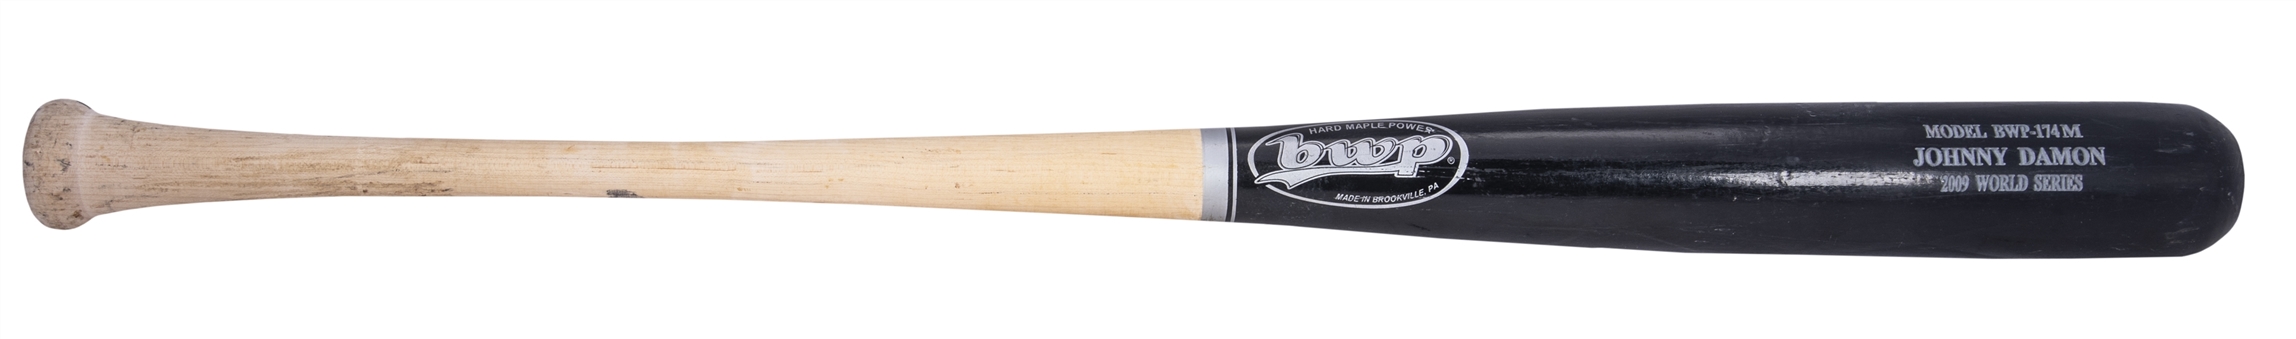 2009 Johnny Damon Game Used BWP 174M Professional Model Bat - Possible World Series Use (PSA/DNA)